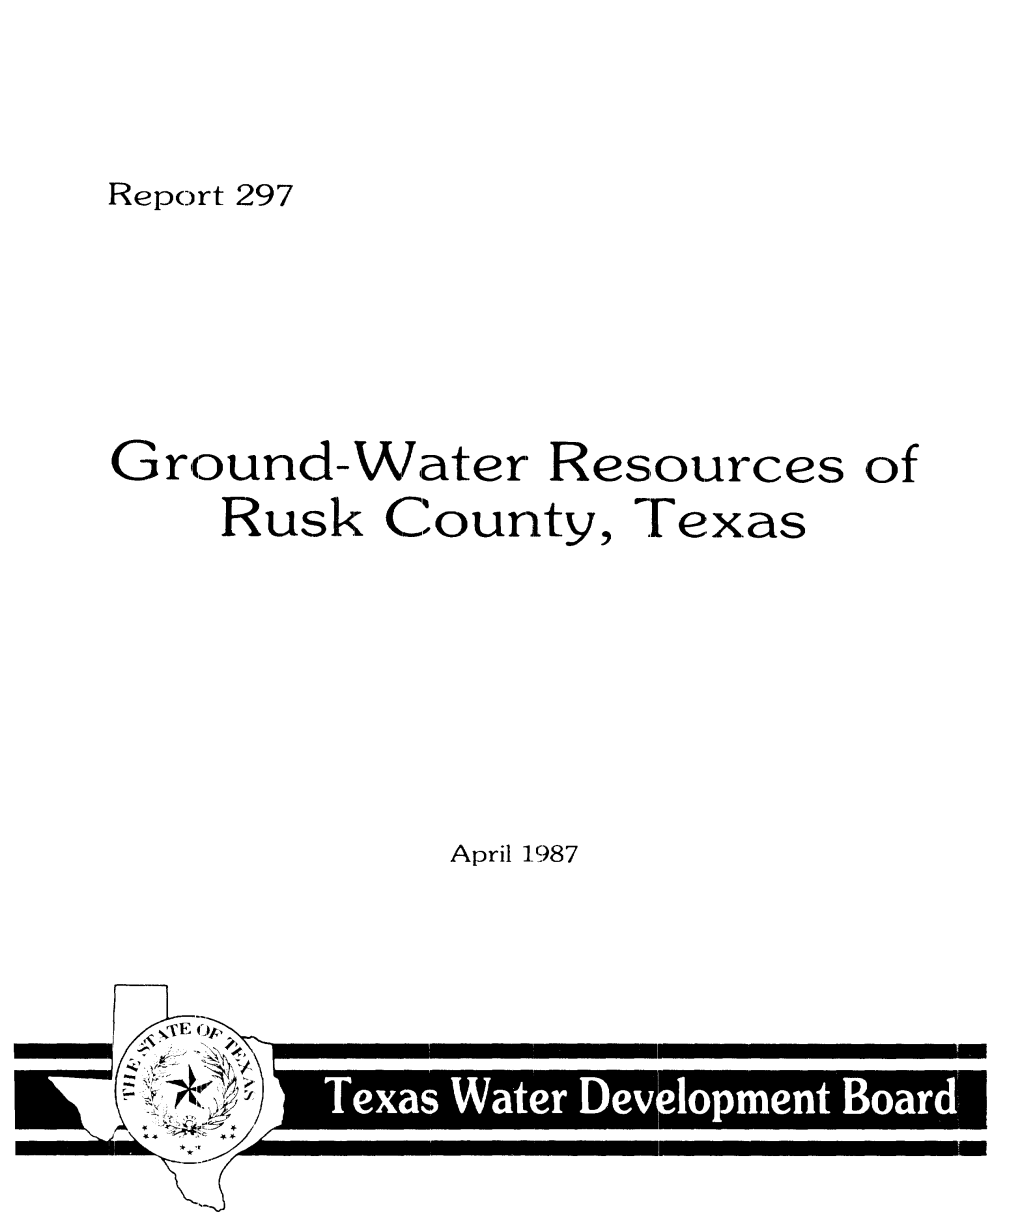 Ground-Water Resources of Rusk County, Texas